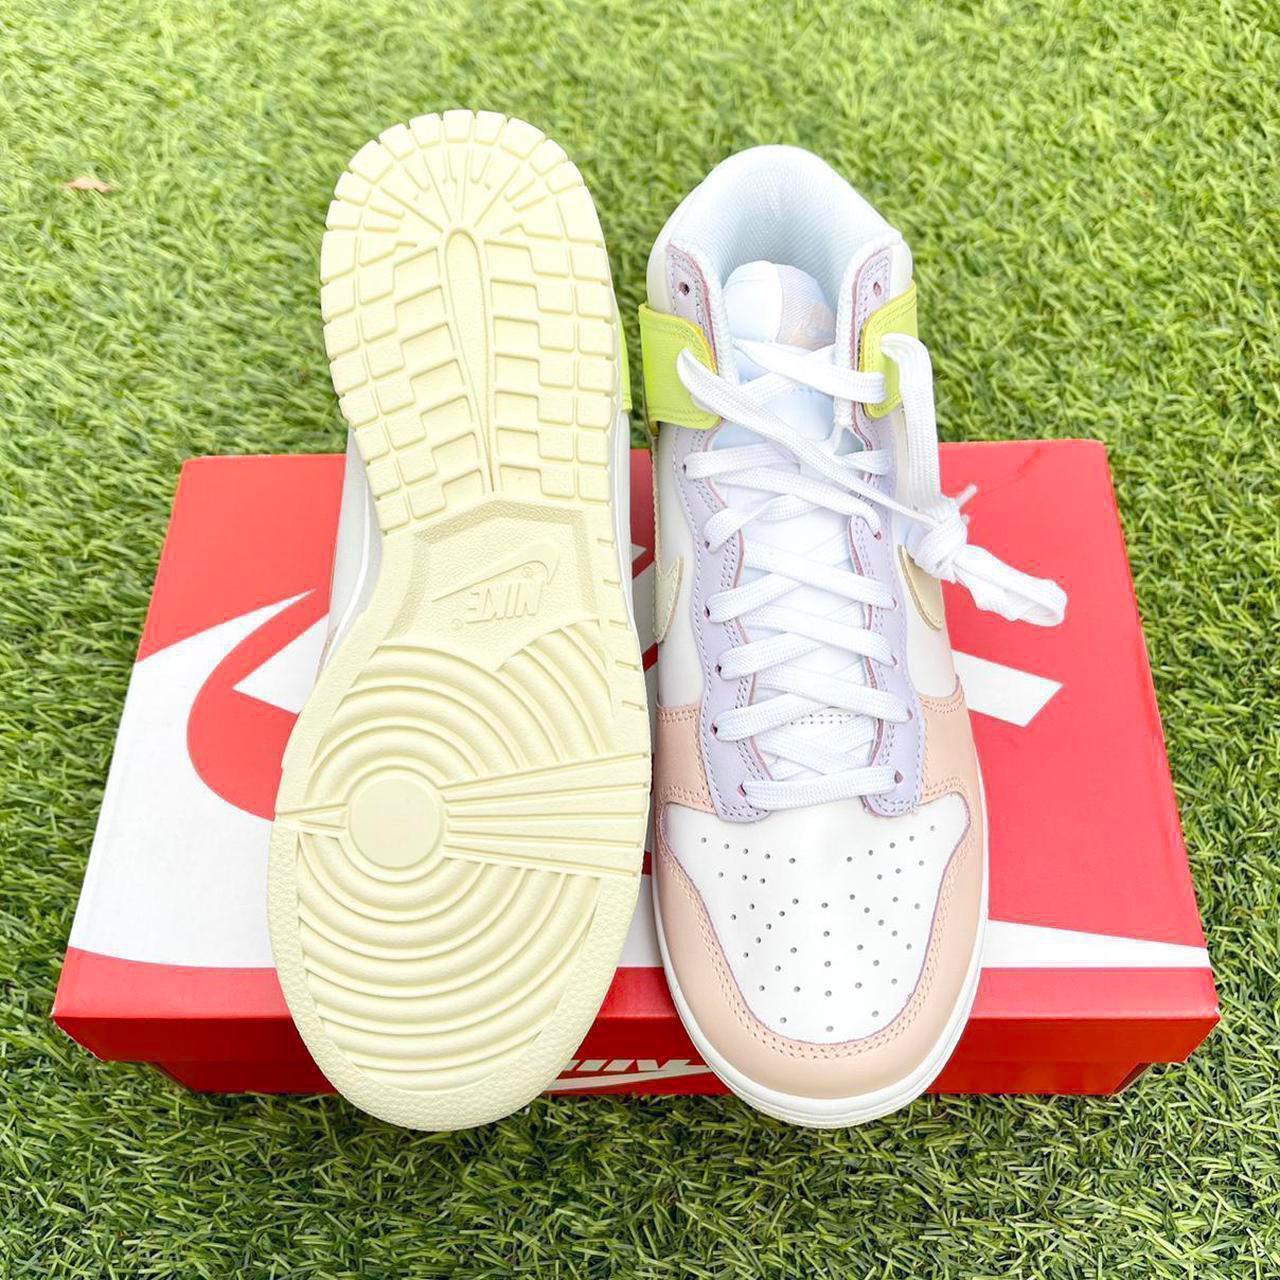 Product Image 3 - Nike Dunk high pastel GS

Brand